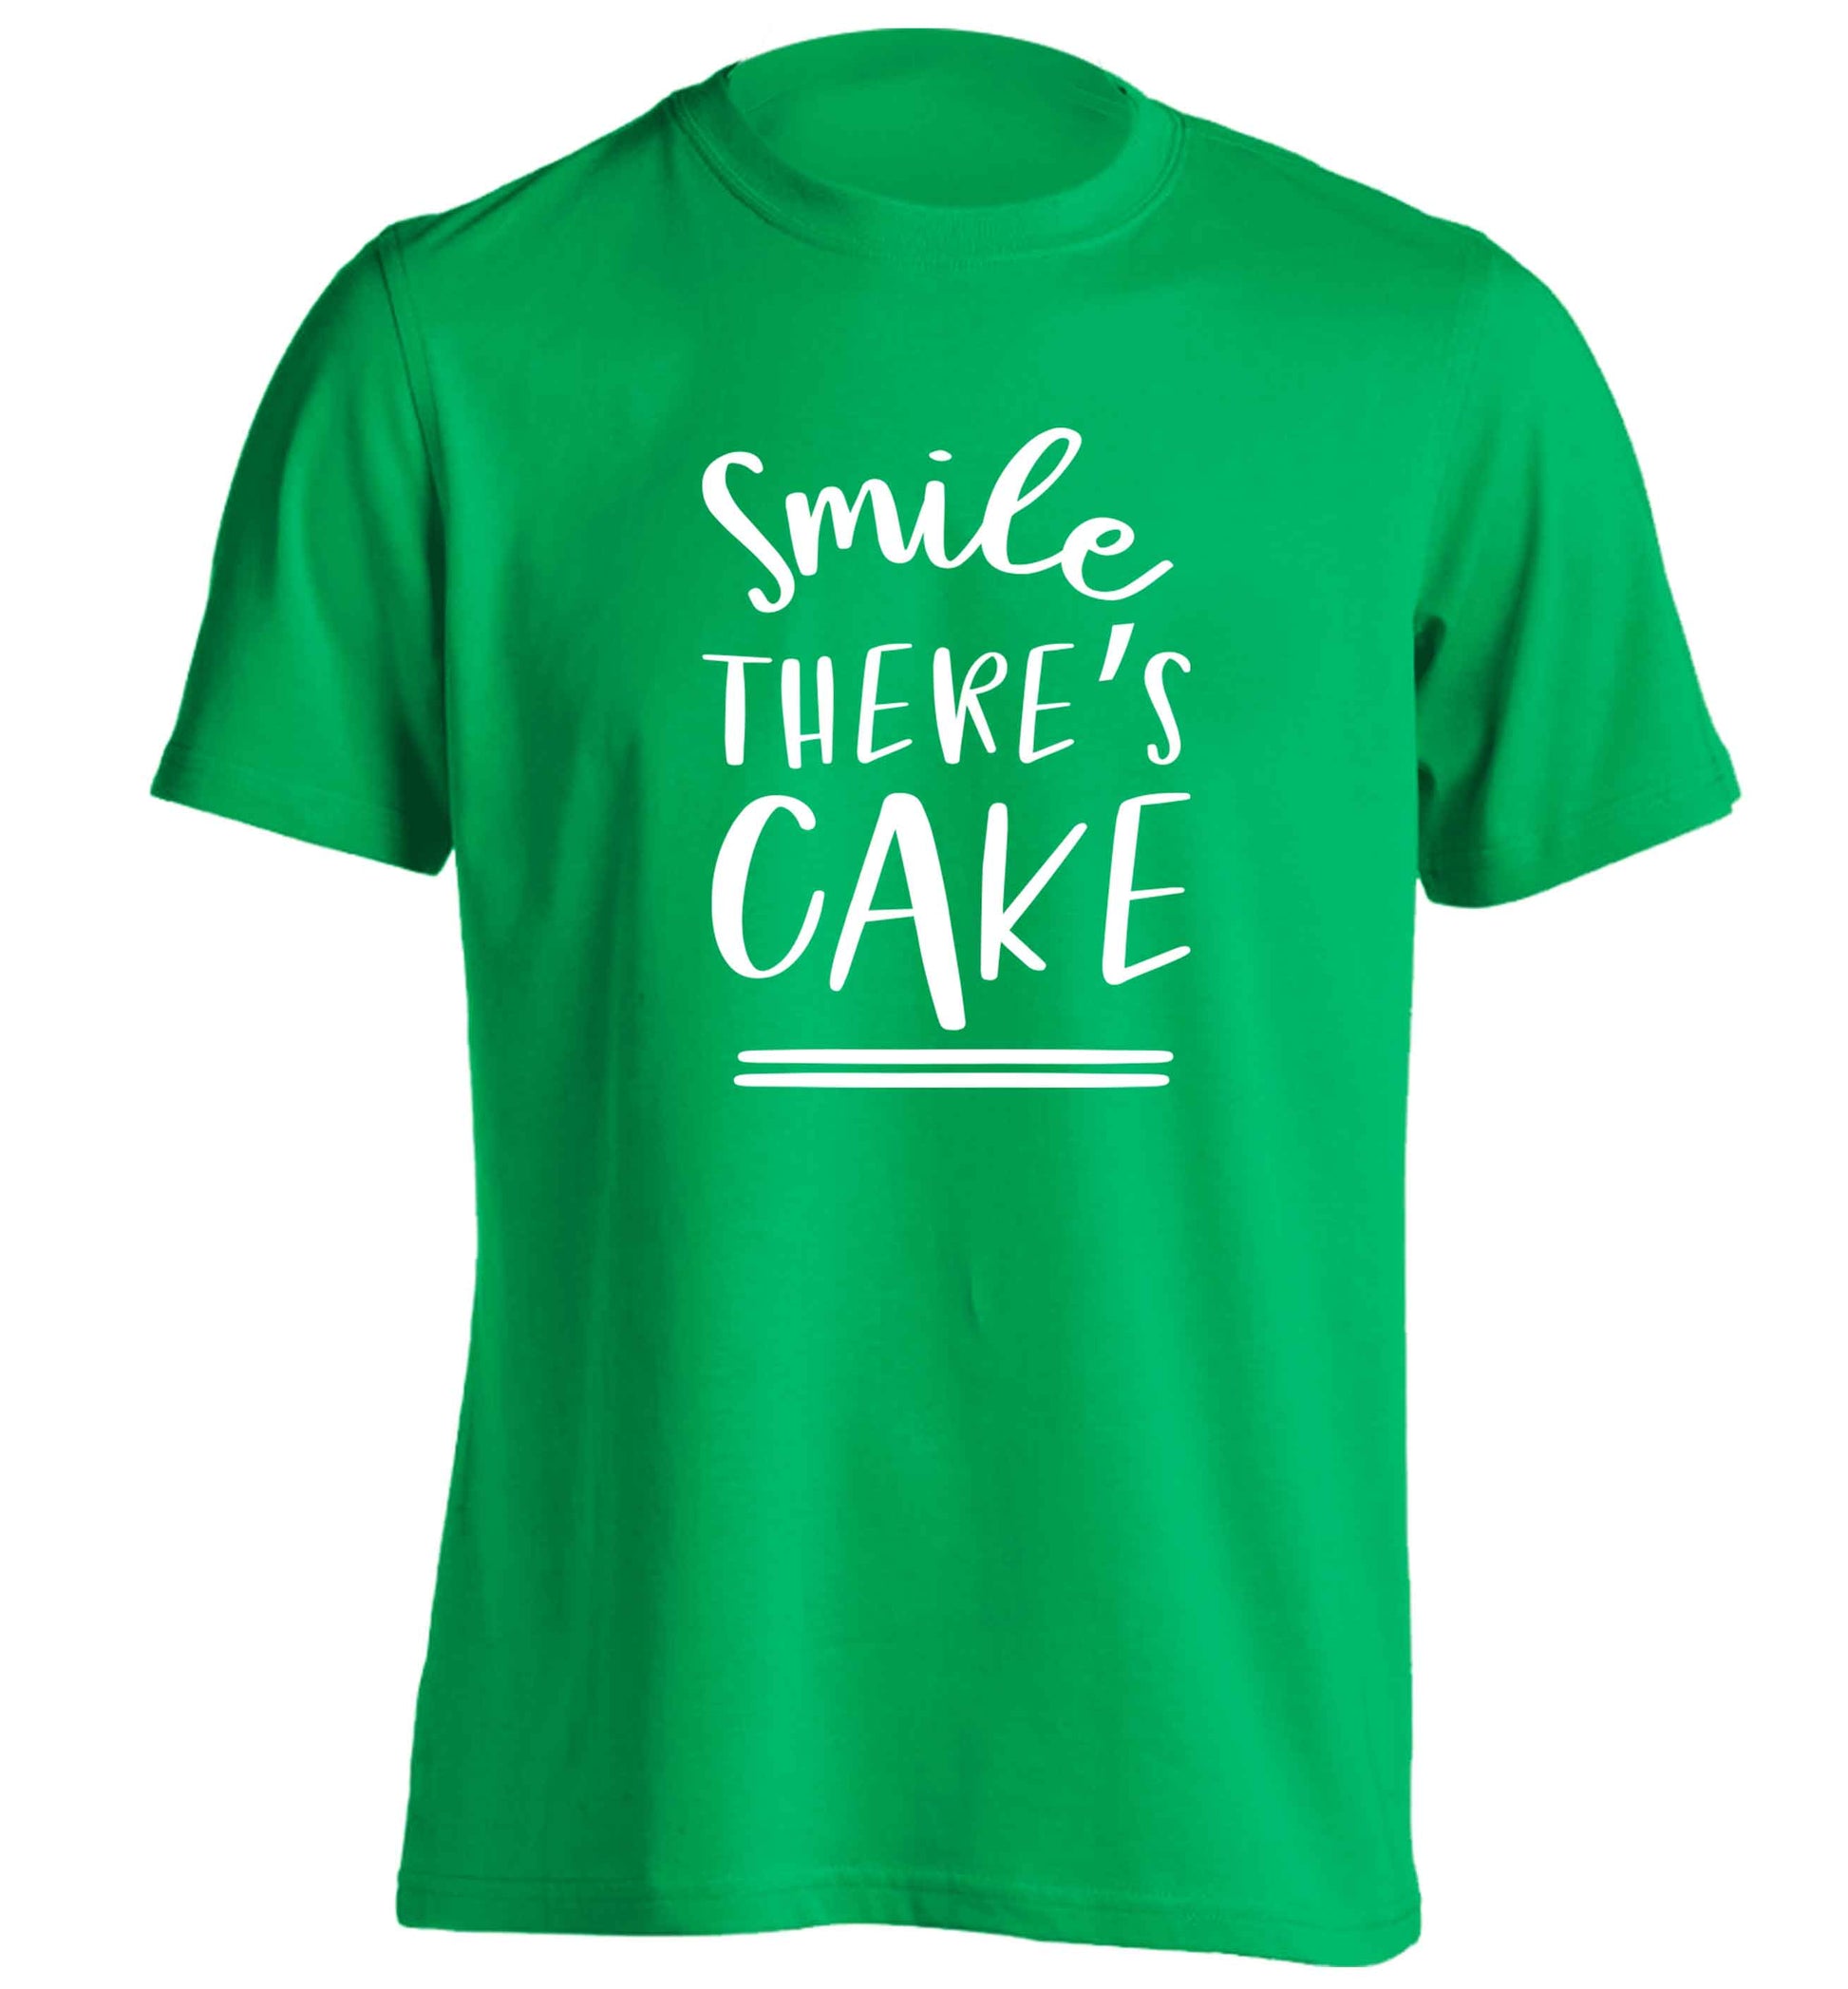 Smile there's cake adults unisex green Tshirt 2XL